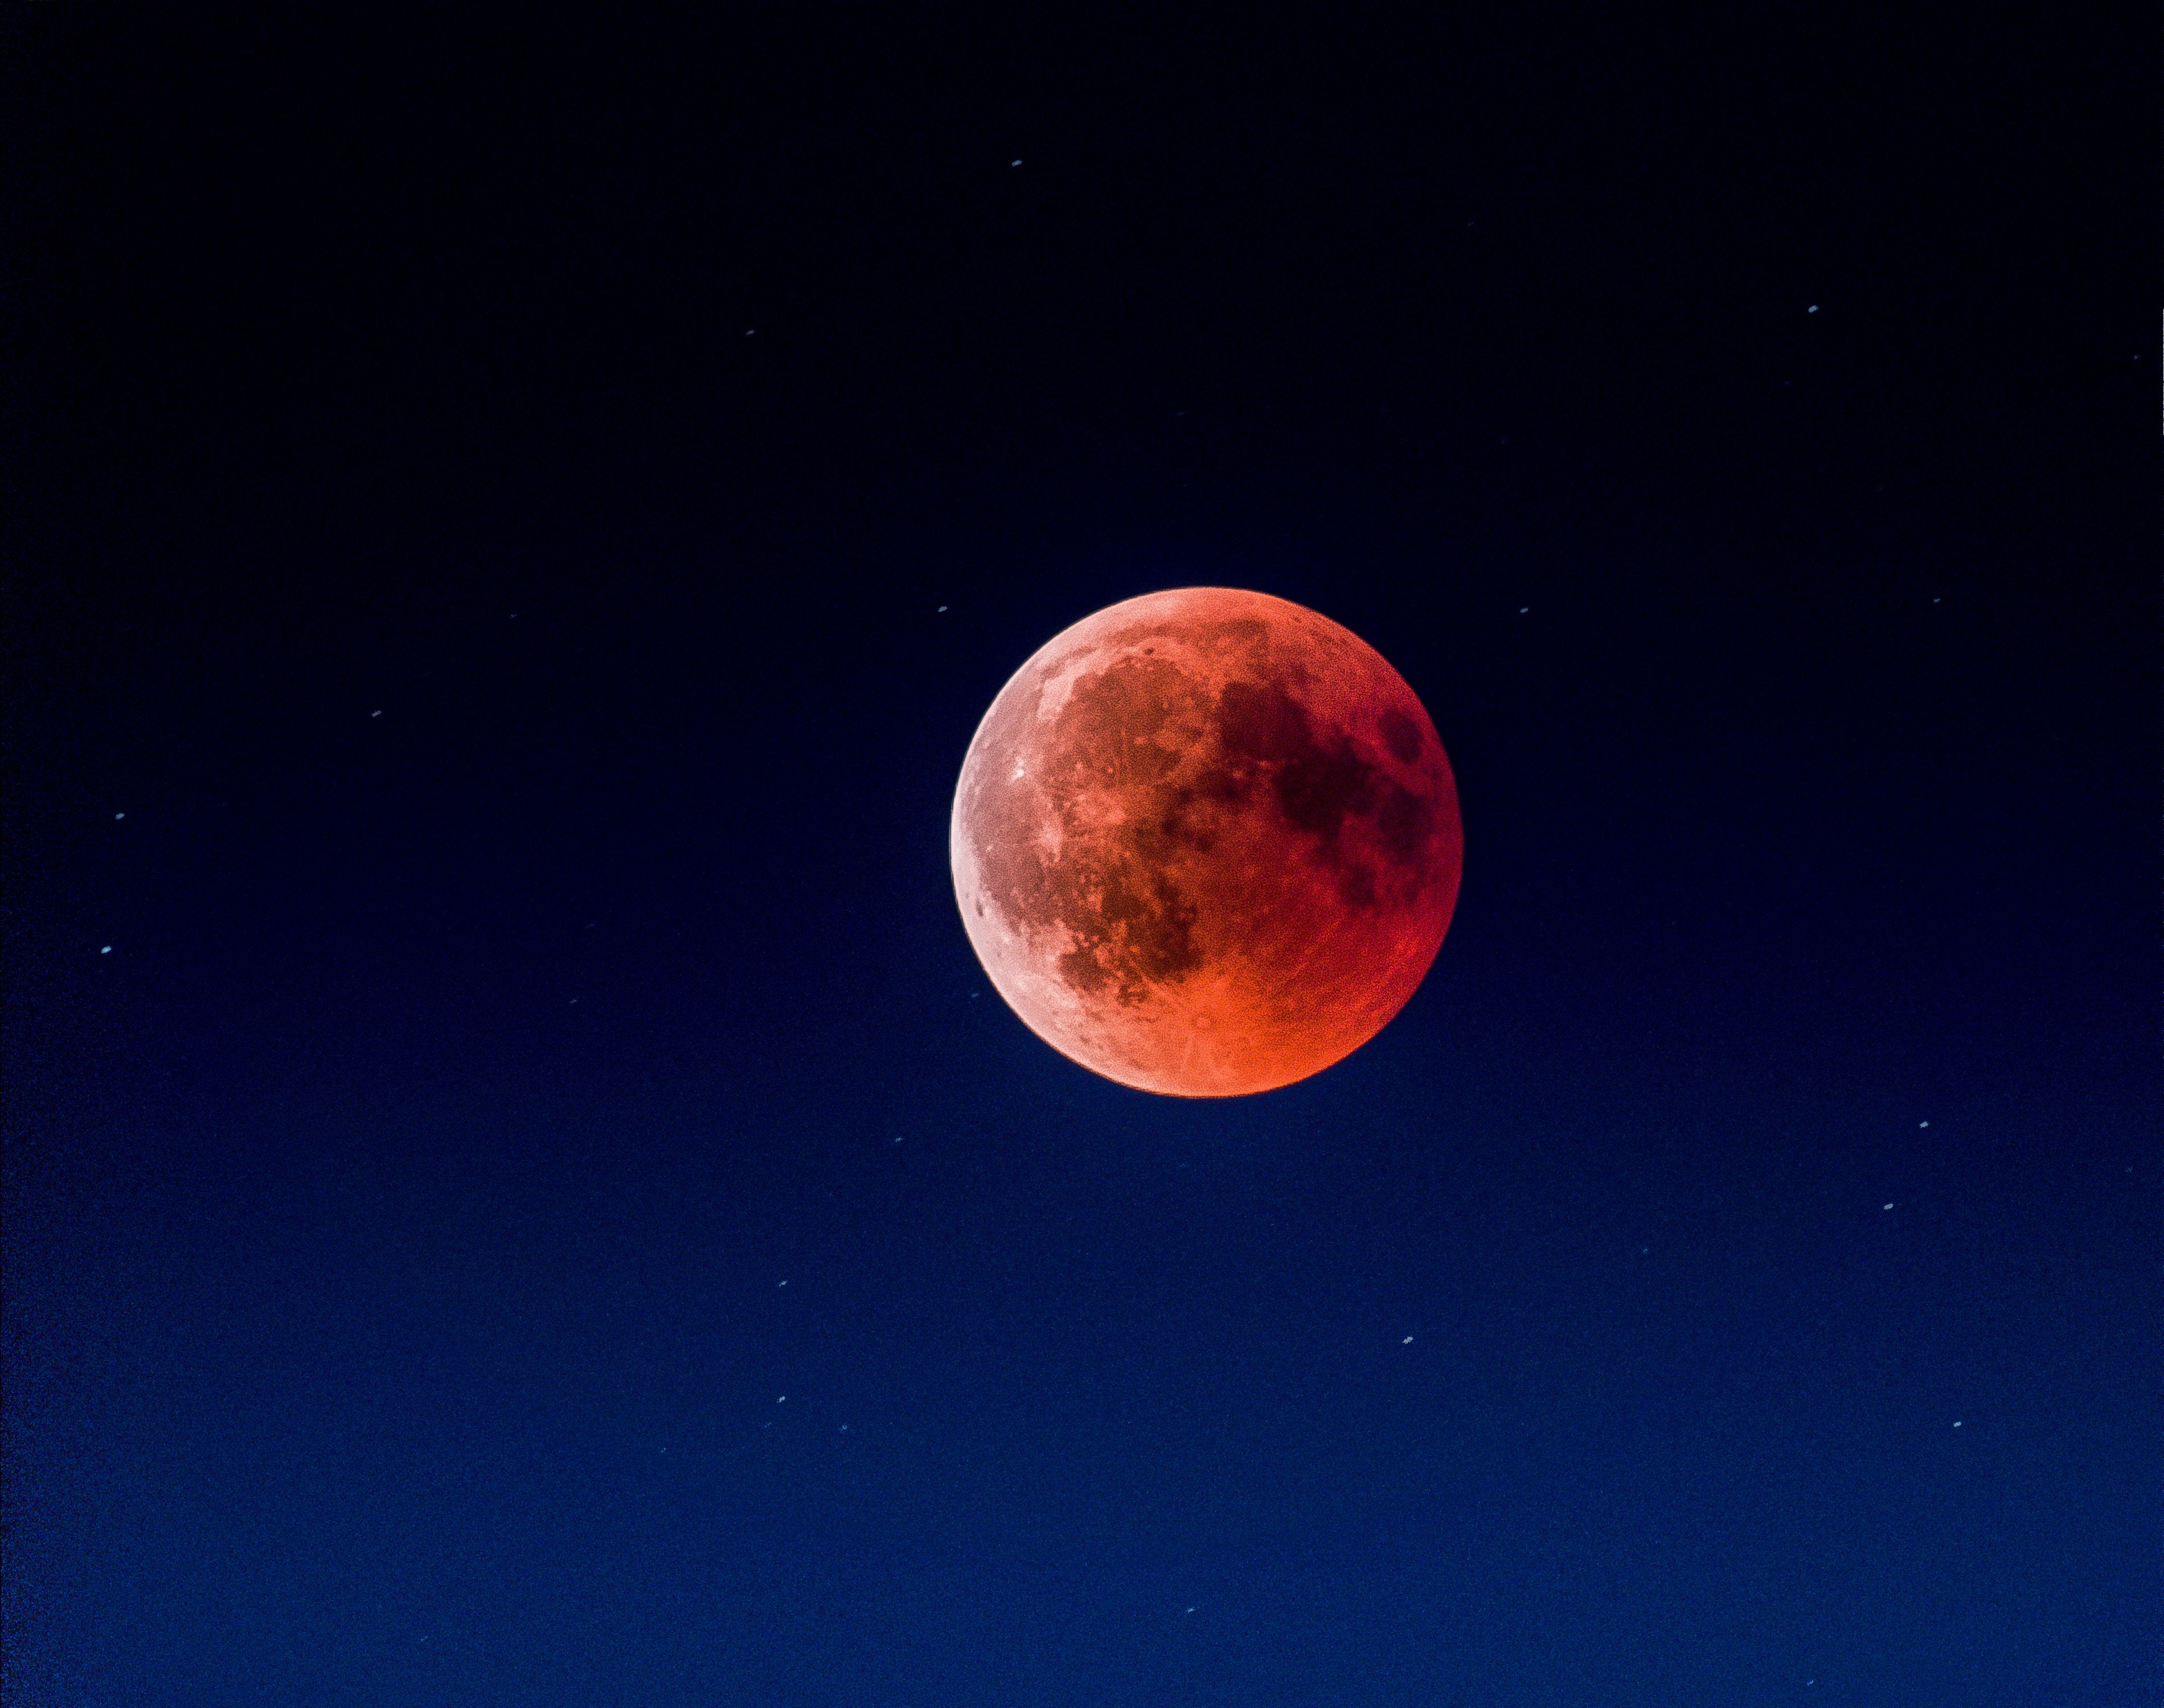 Download wallpaper 3800x3000 full moon, red moon, eclipse, bloody moon HD background